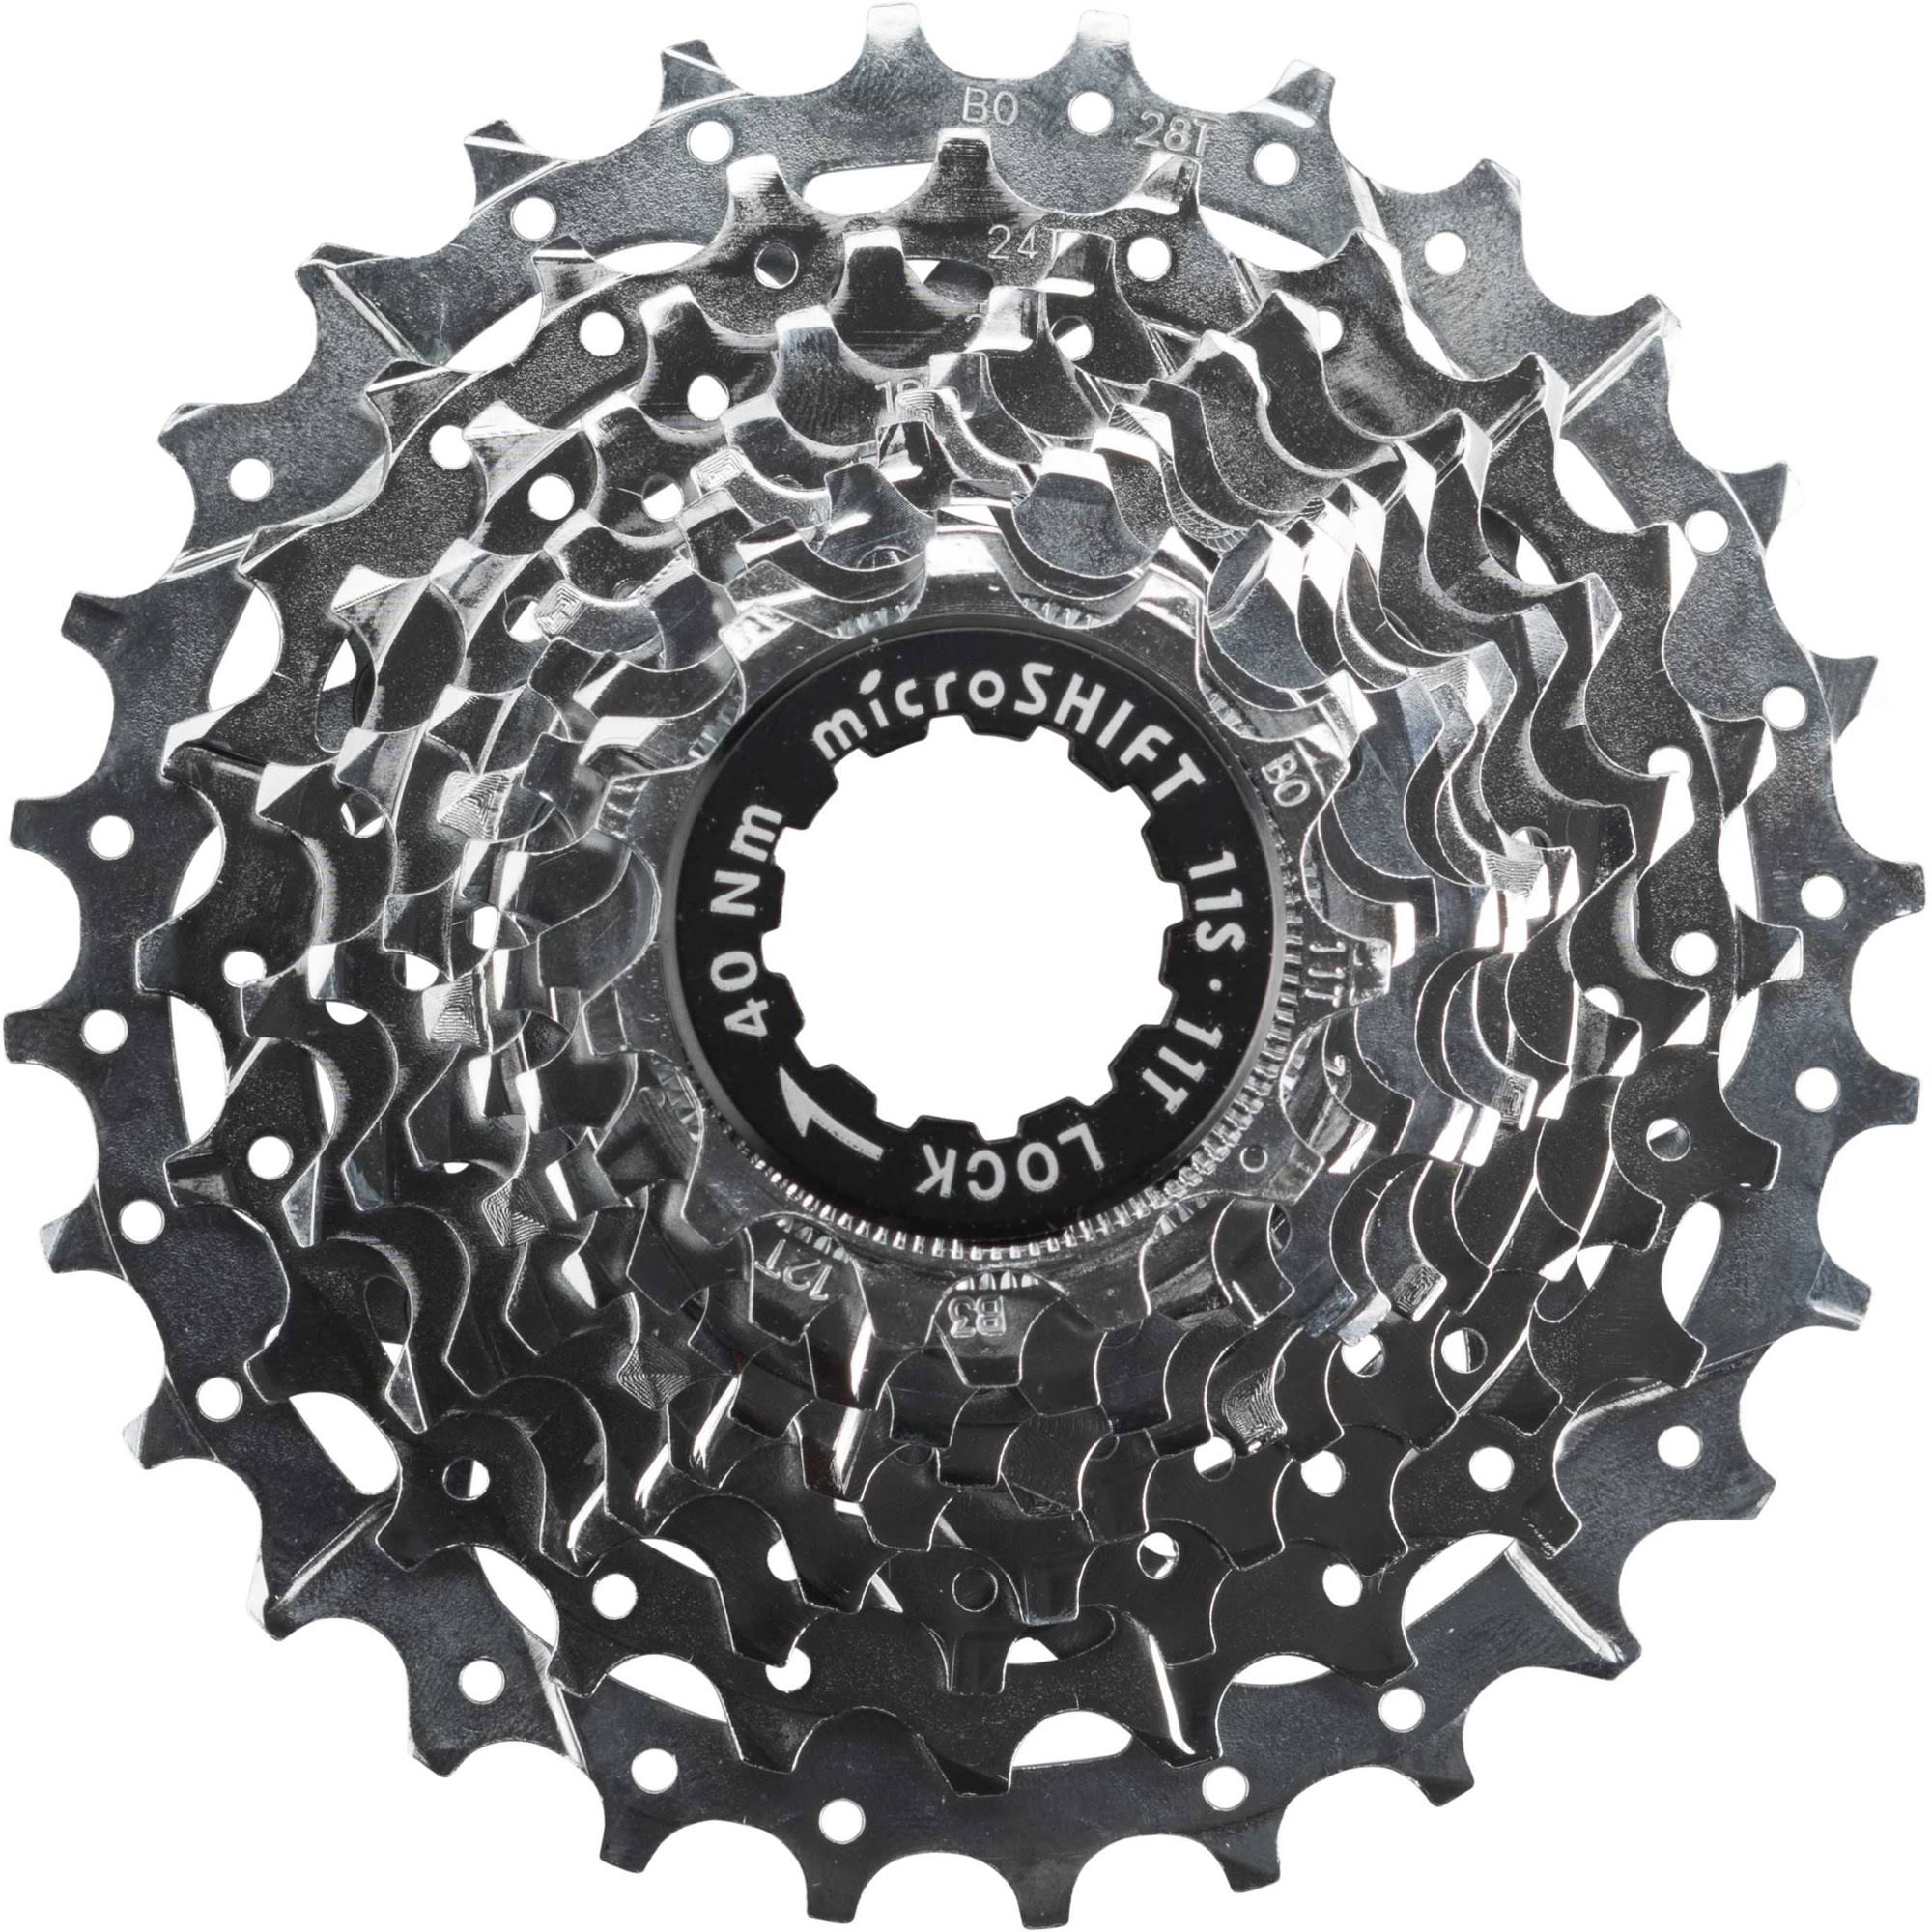 microSHIFT Centos H110 11 Speed Cassette - 11-28t - Silver